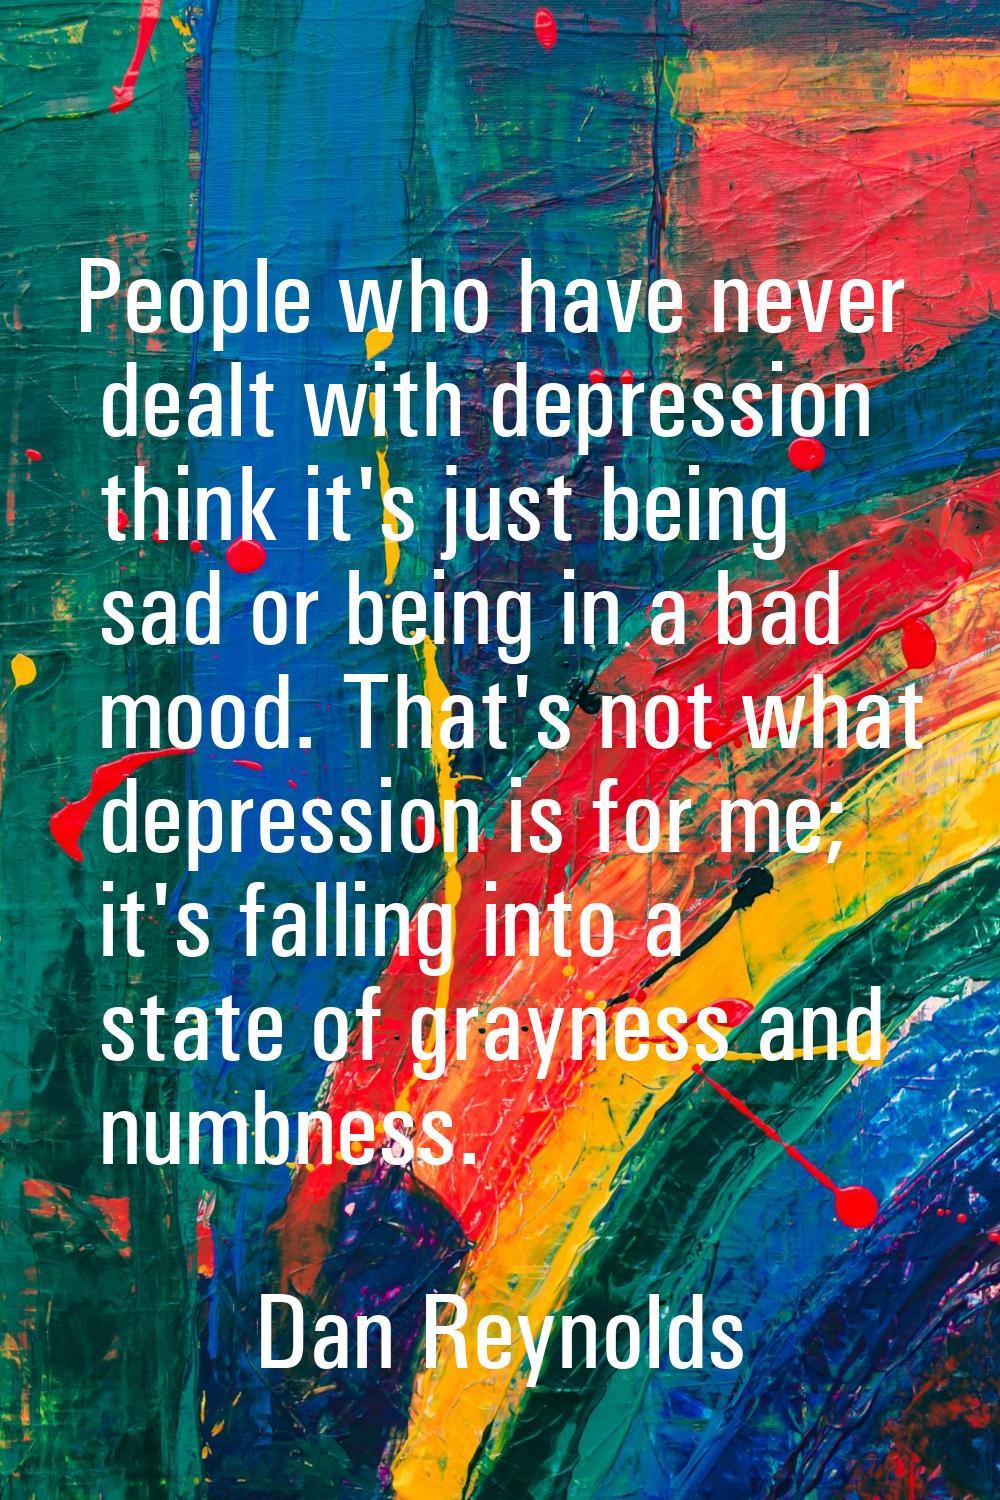 People who have never dealt with depression think it's just being sad or being in a bad mood. That'